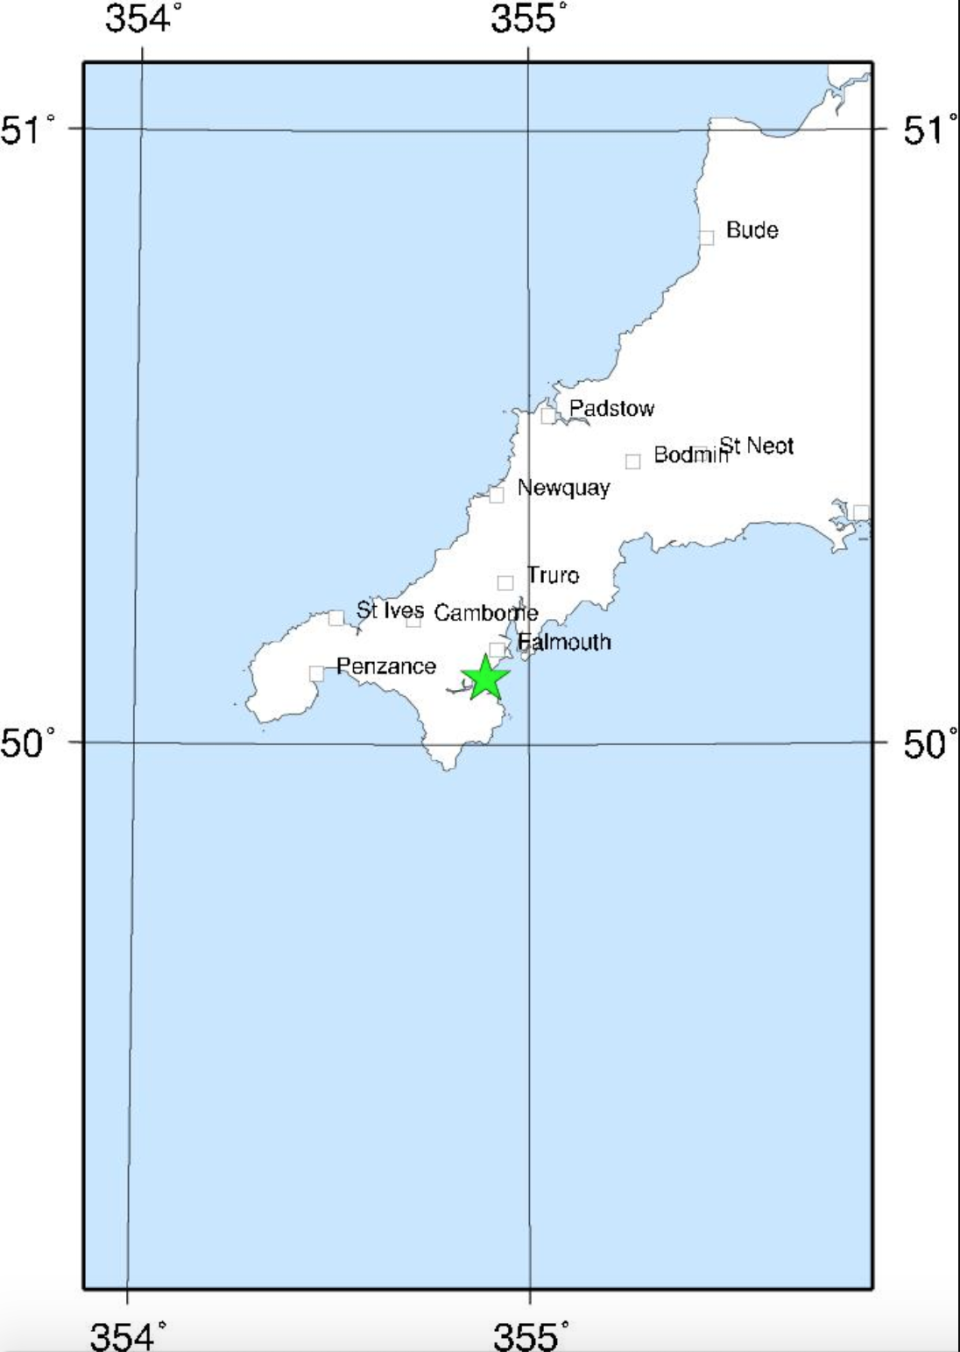 The British Geological Survey said the tremor hit around 5km south-west of Falmouth in Cornwall (Picture: British Geological Survey)